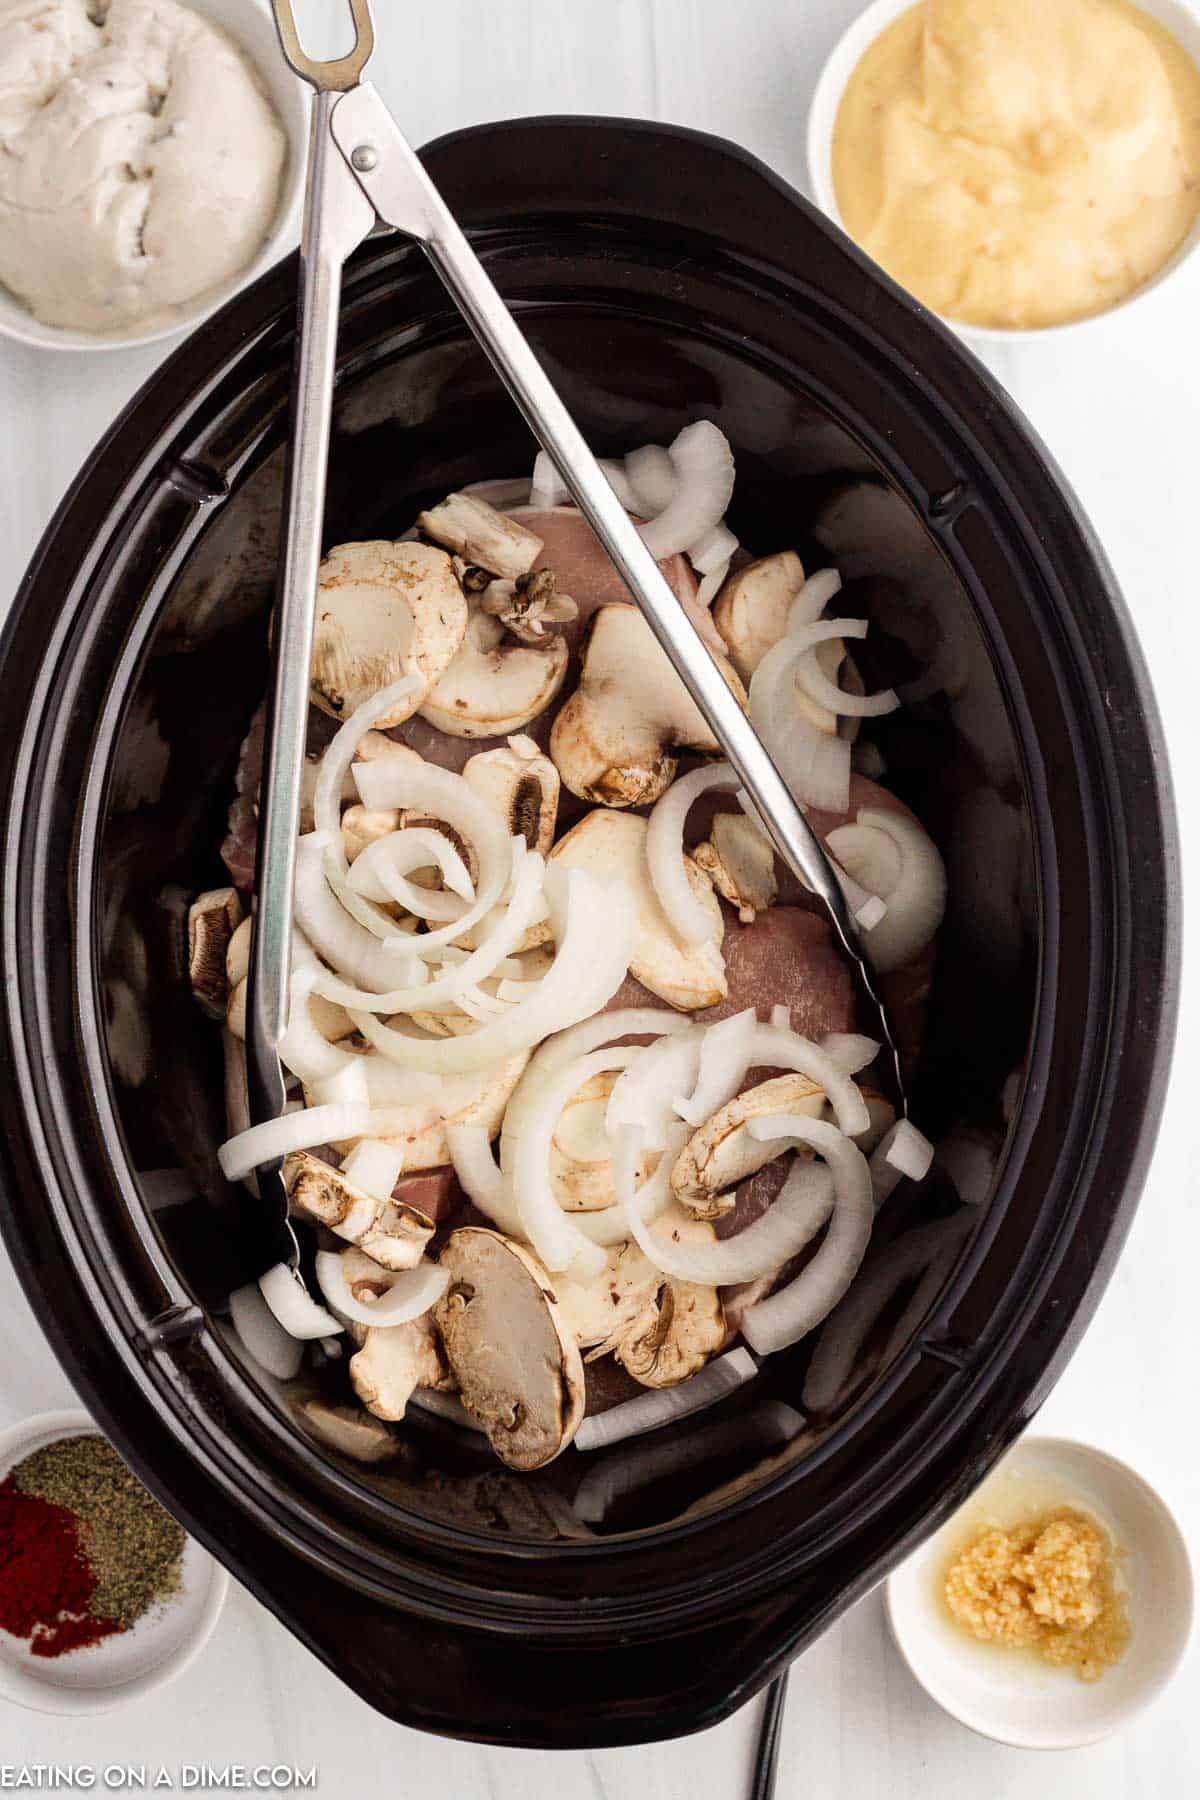 Pork chops in the slow cooker topped with slice mushrooms and onion slices with tongs in slow cooker. Bowls of cream of soups, minced garlic and seasoning on the side